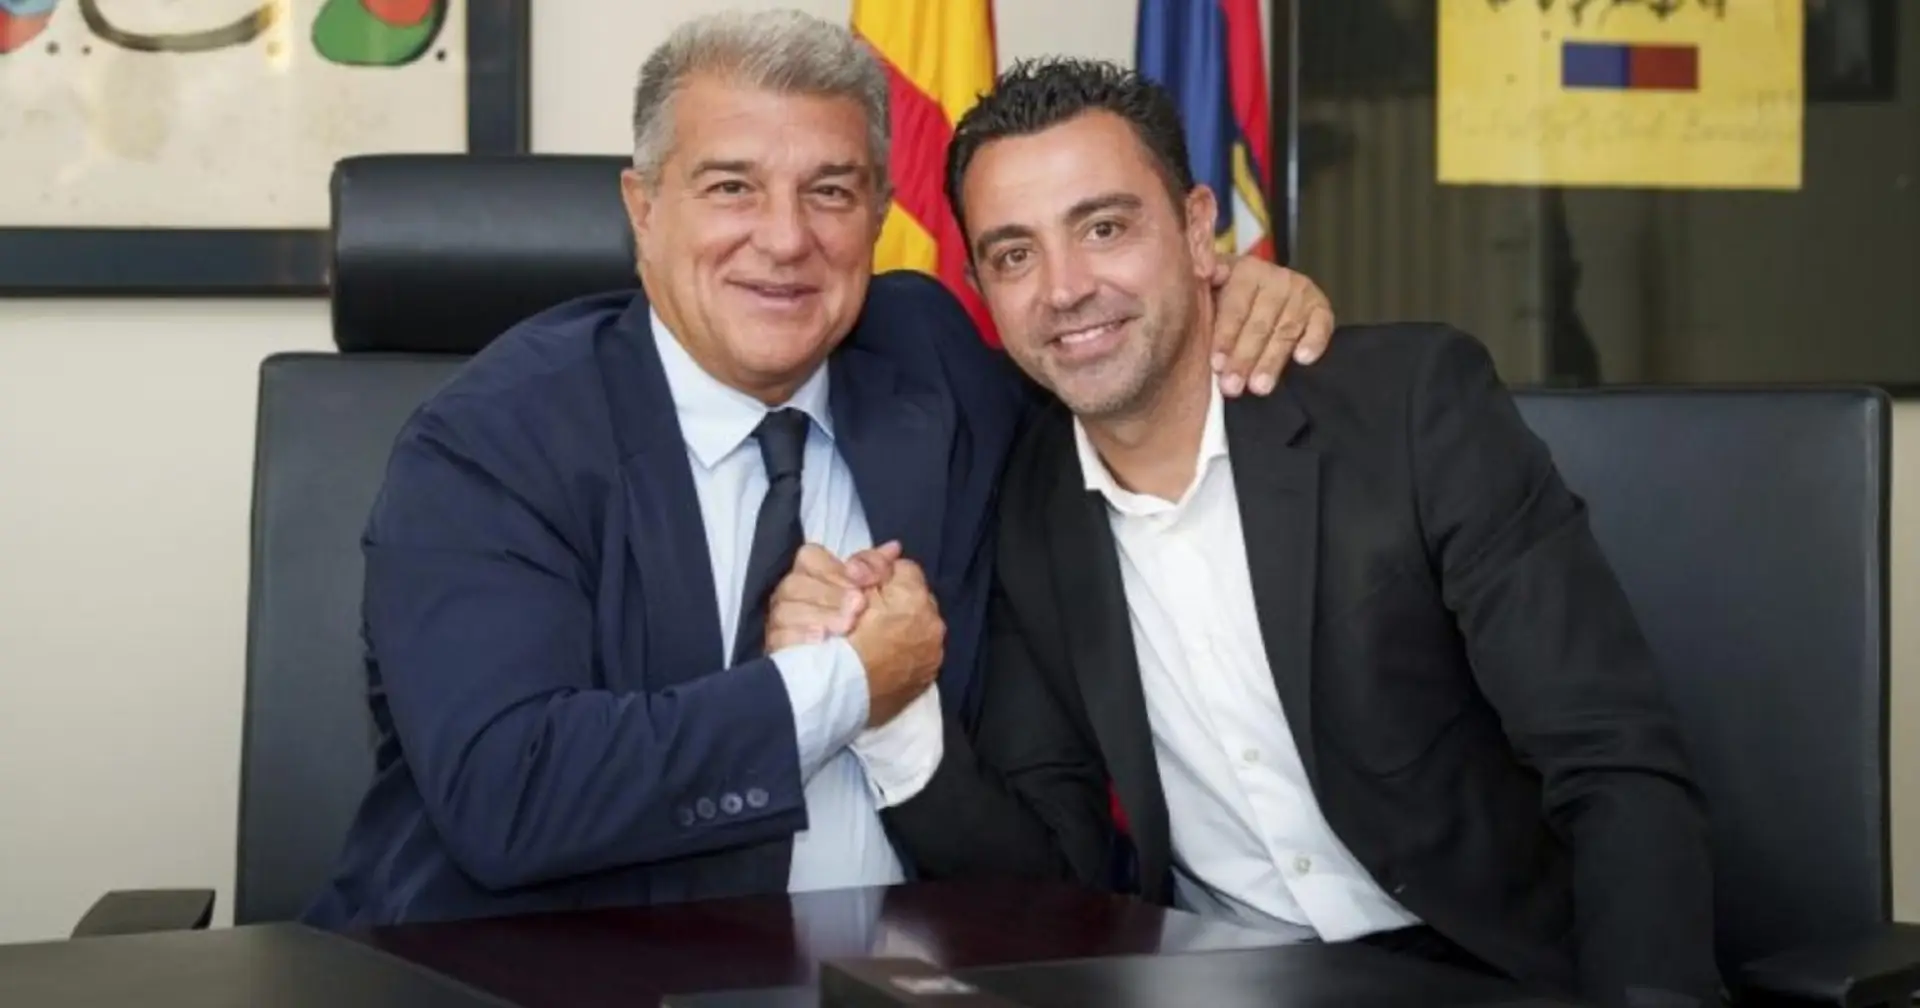 Laporta to try and convince Xavi to stay on one condition